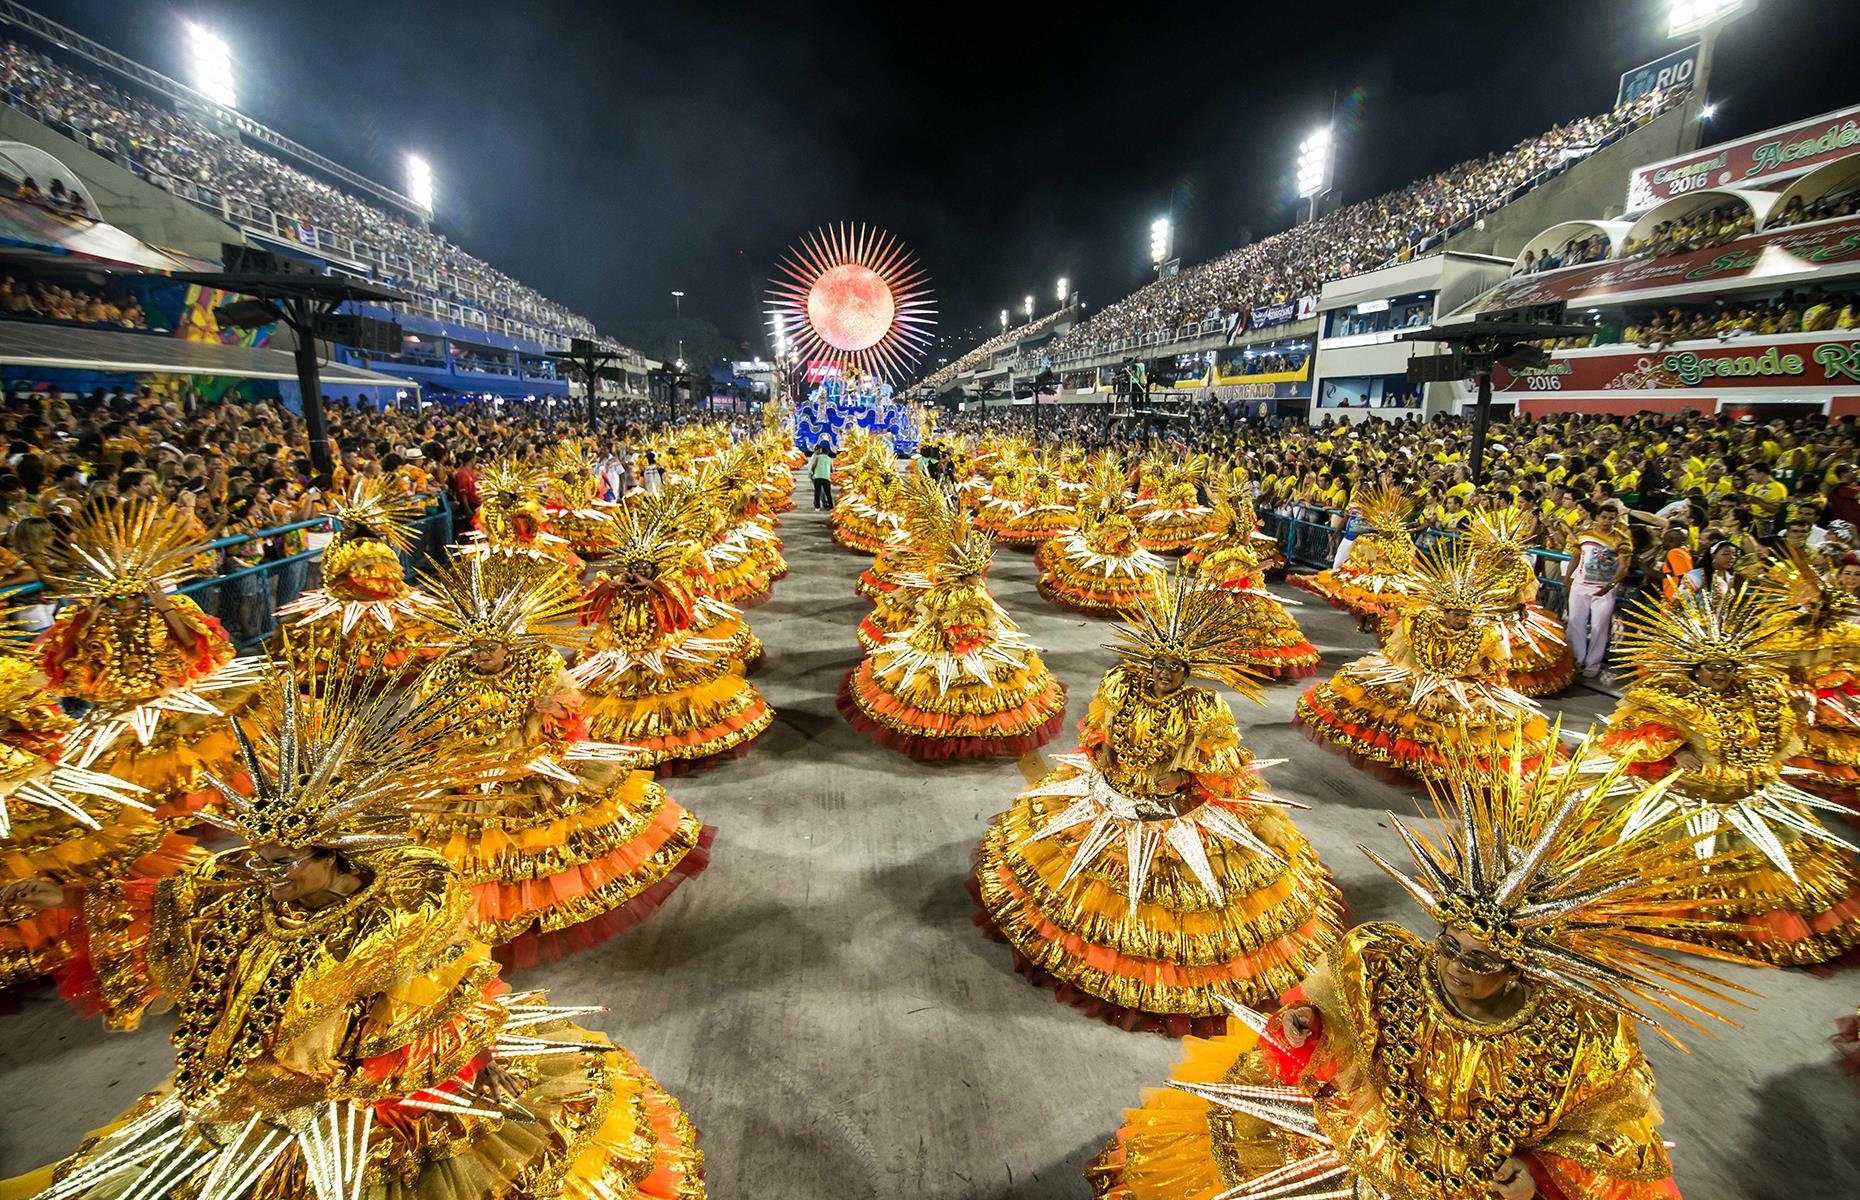 The Brazilians know how to party and each year during Lent, Rio de Janeiro hosts the world's biggest carnival. Take to the streets to watch the parade of colorful floats and samba dancers before heading to one of the clubs to show off your best moves.